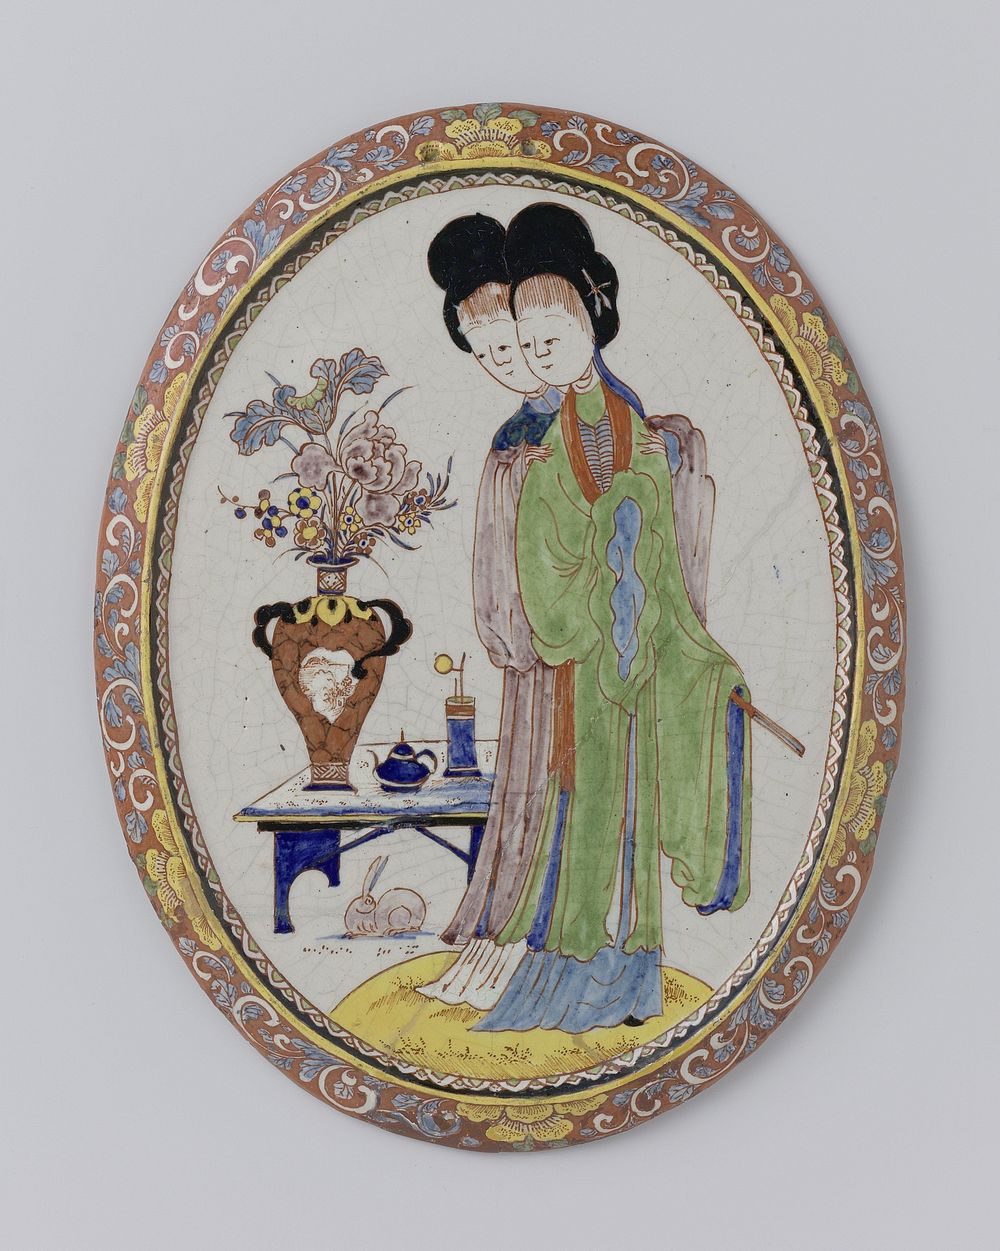 Plaque (c. 1740 - c. 1770) by anonymous